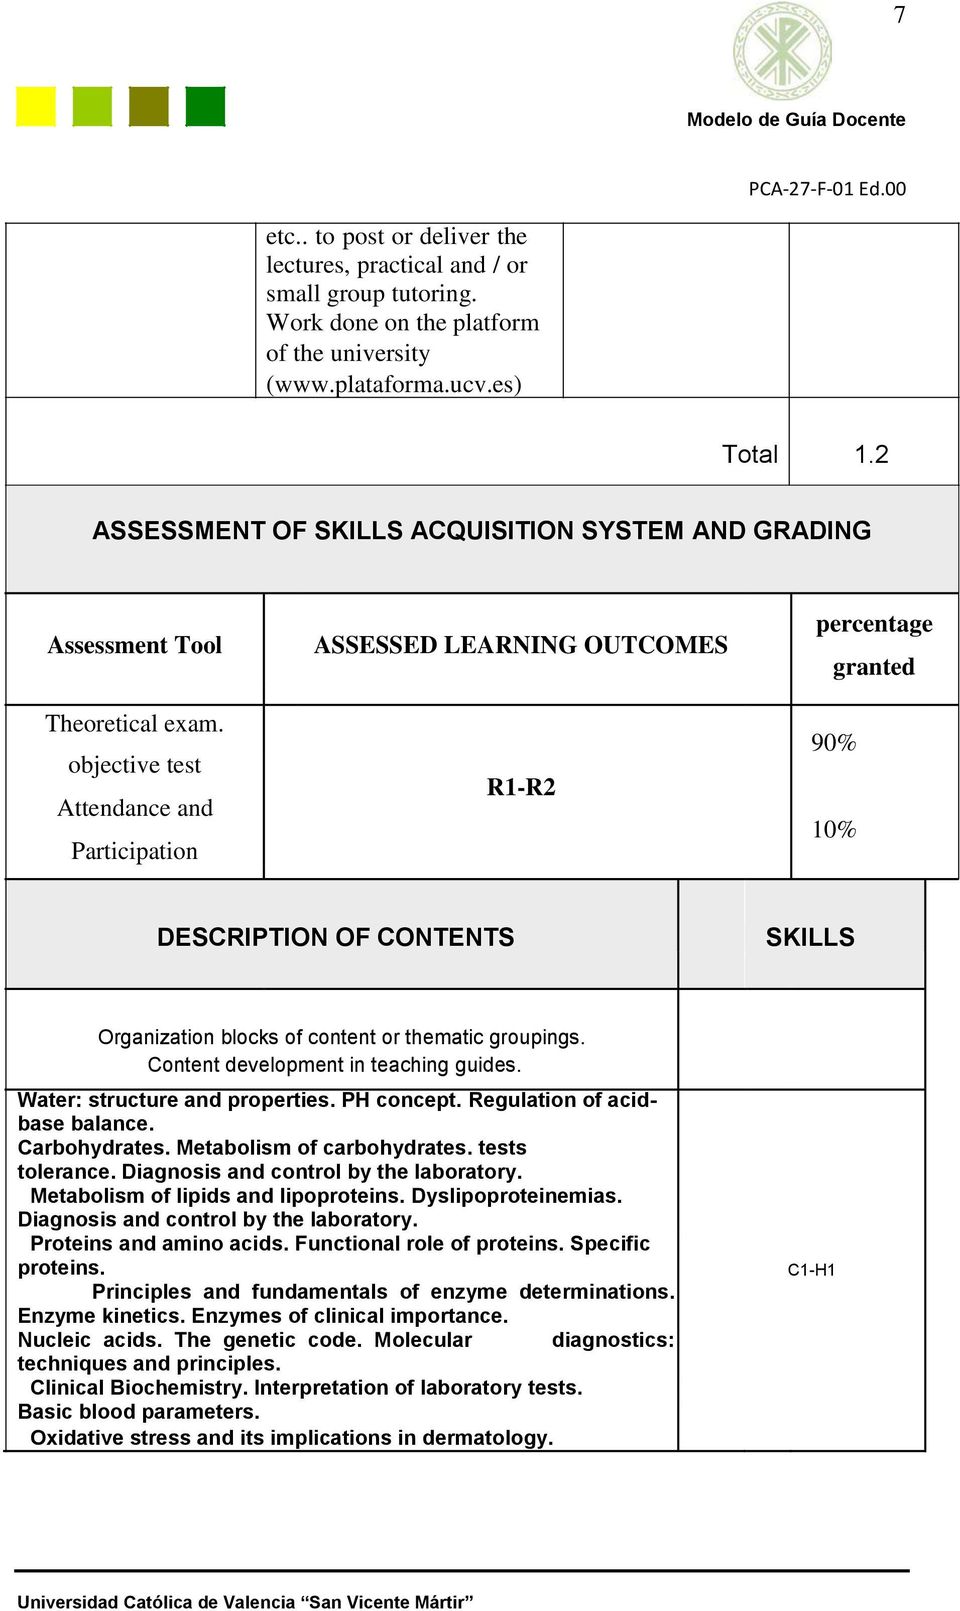 objective test Attendance and Participation ASSESSED LEARNING OUTCOMES R-R2 percentage granted 90% 0% DESCRIPTION OF CONTENTS SKILLS Organization blocks of content or thematic groupings.